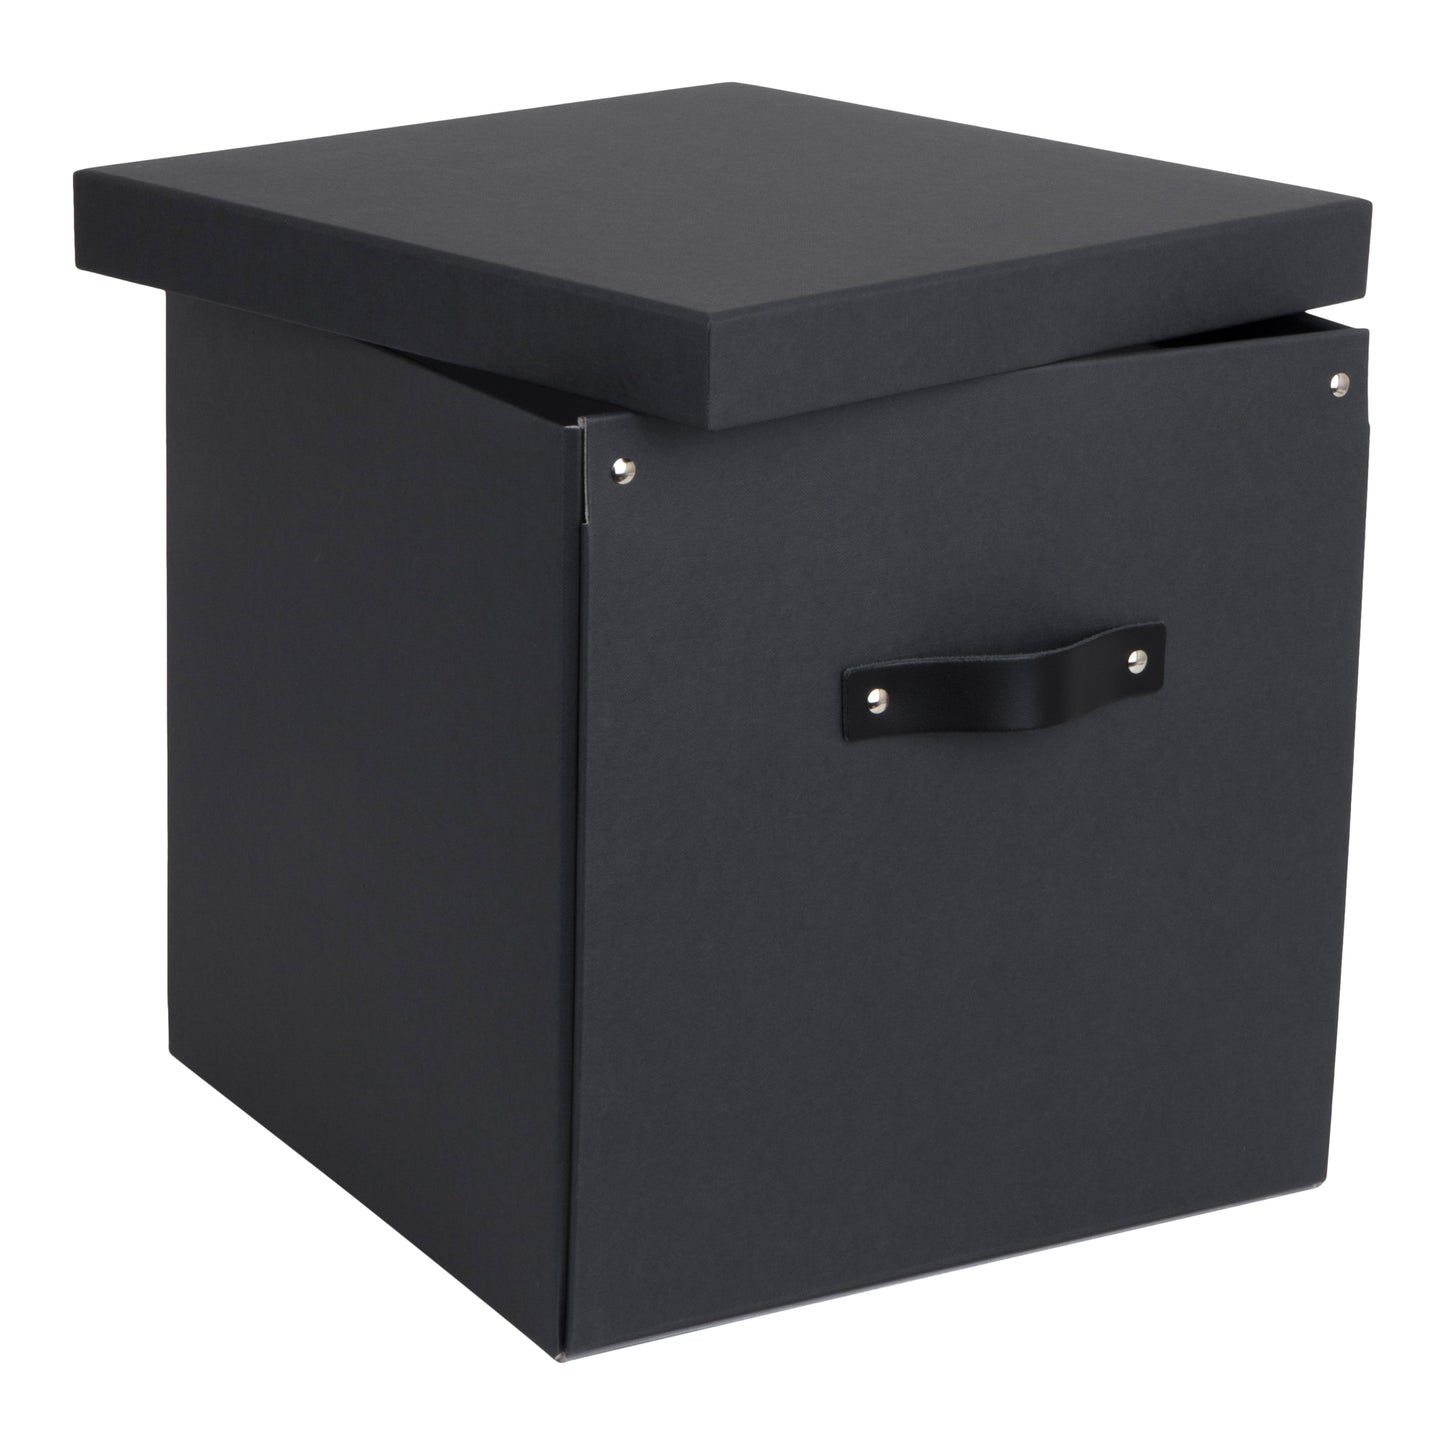 Bigso Logan Collapsible Storage Box KD with Lid for Shelves and Cubical Room Organizers 12.4’’ x 12.4’’ x 12.2’’